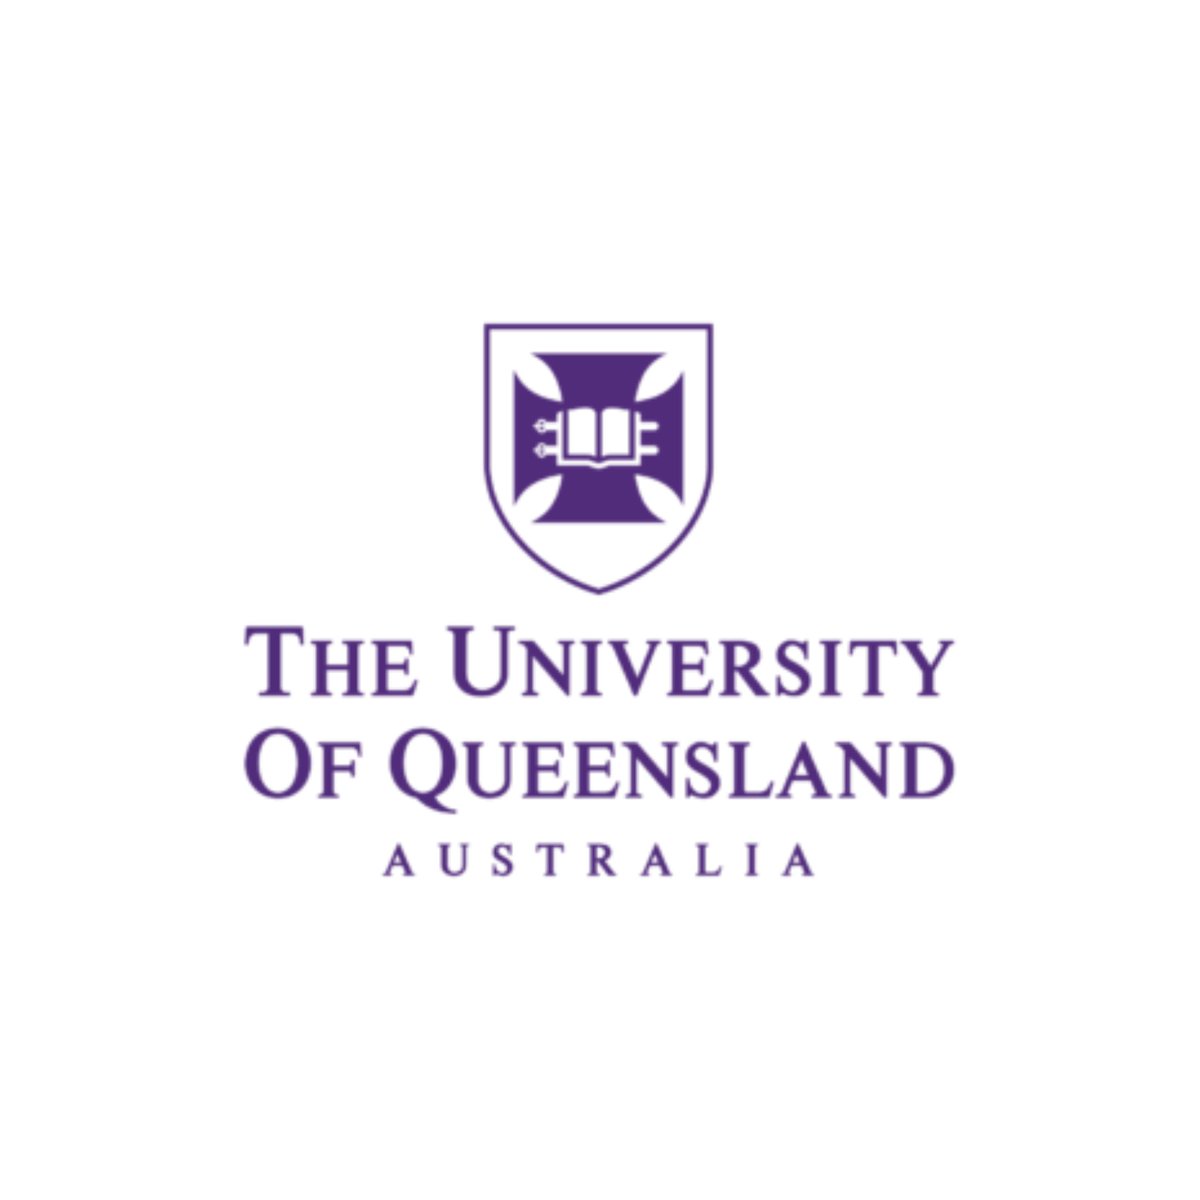 Job Opportunity Veterinary Nurse – Client Care and Dispensary at The University of Queensland; Gatton, QLD, Australia #LoveYourVeterinaryCareer #VeterinaryNurse #ClientCare #TheUniversityofQueensland veterinarycareers.com.au/Jobs/veterinar…